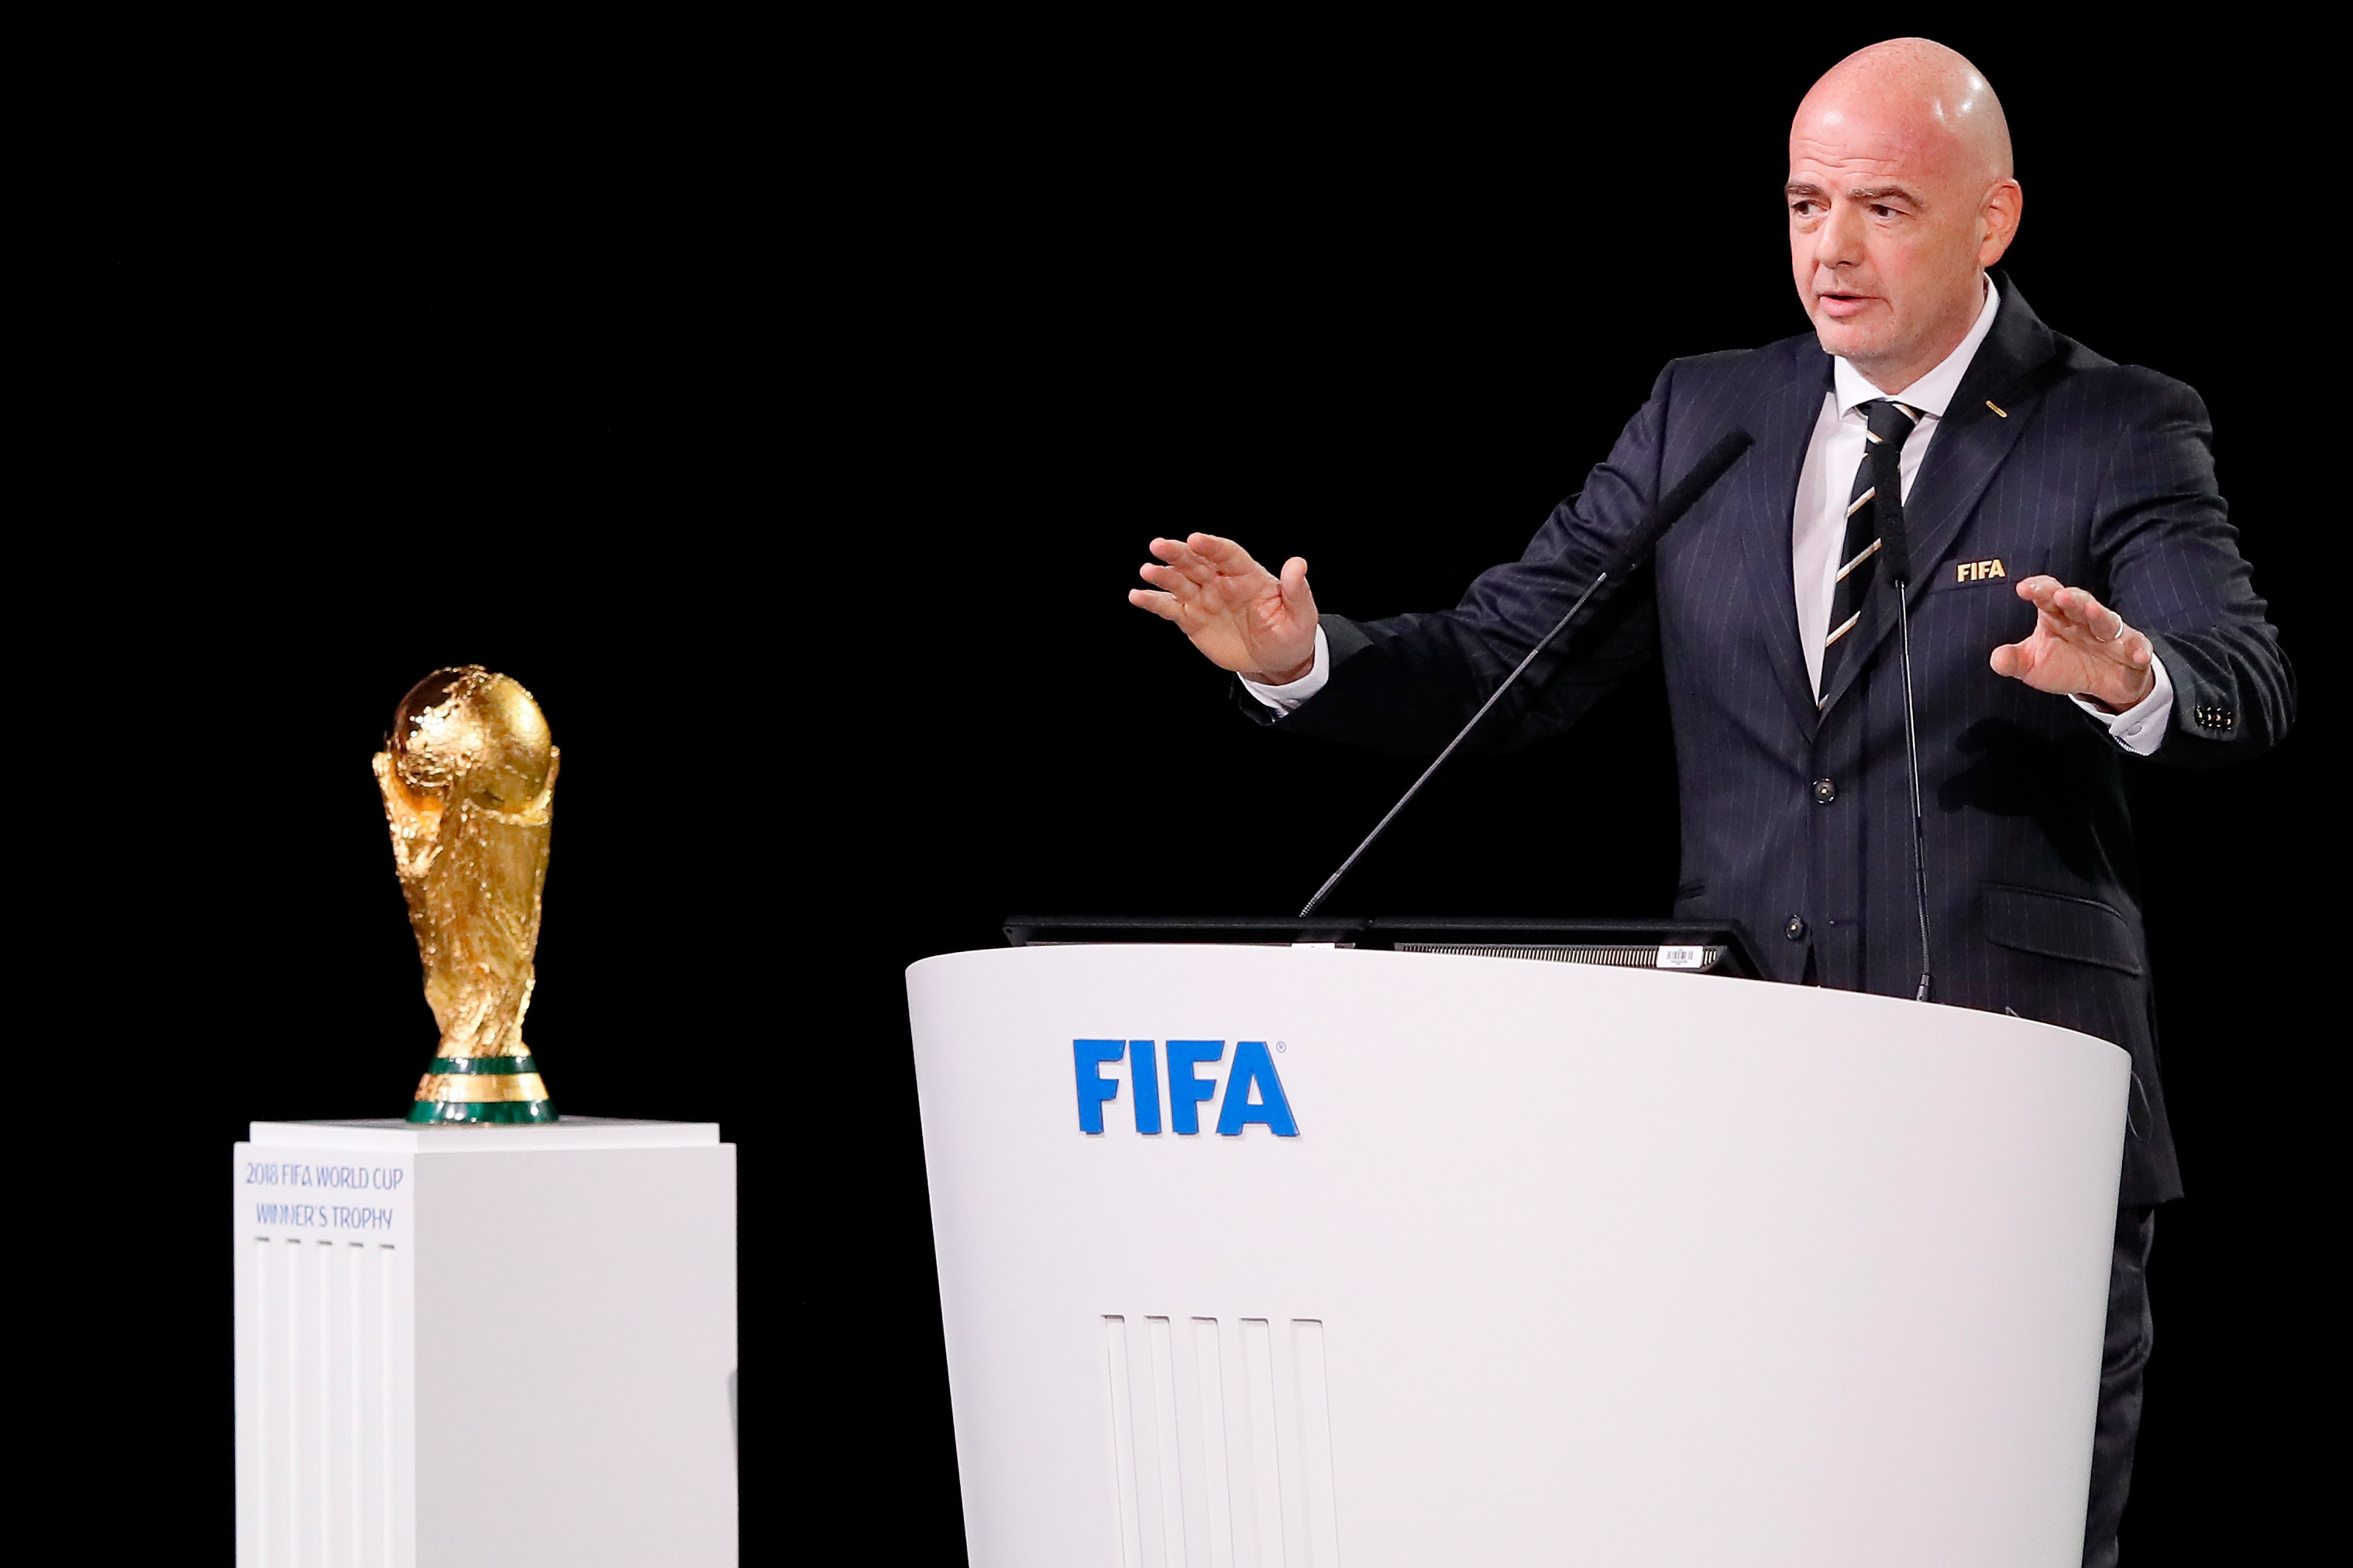 FIFA President Gianni Infantino speaks during the 68th FIFA Congress  (Kevin C. Cox/Getty Images)